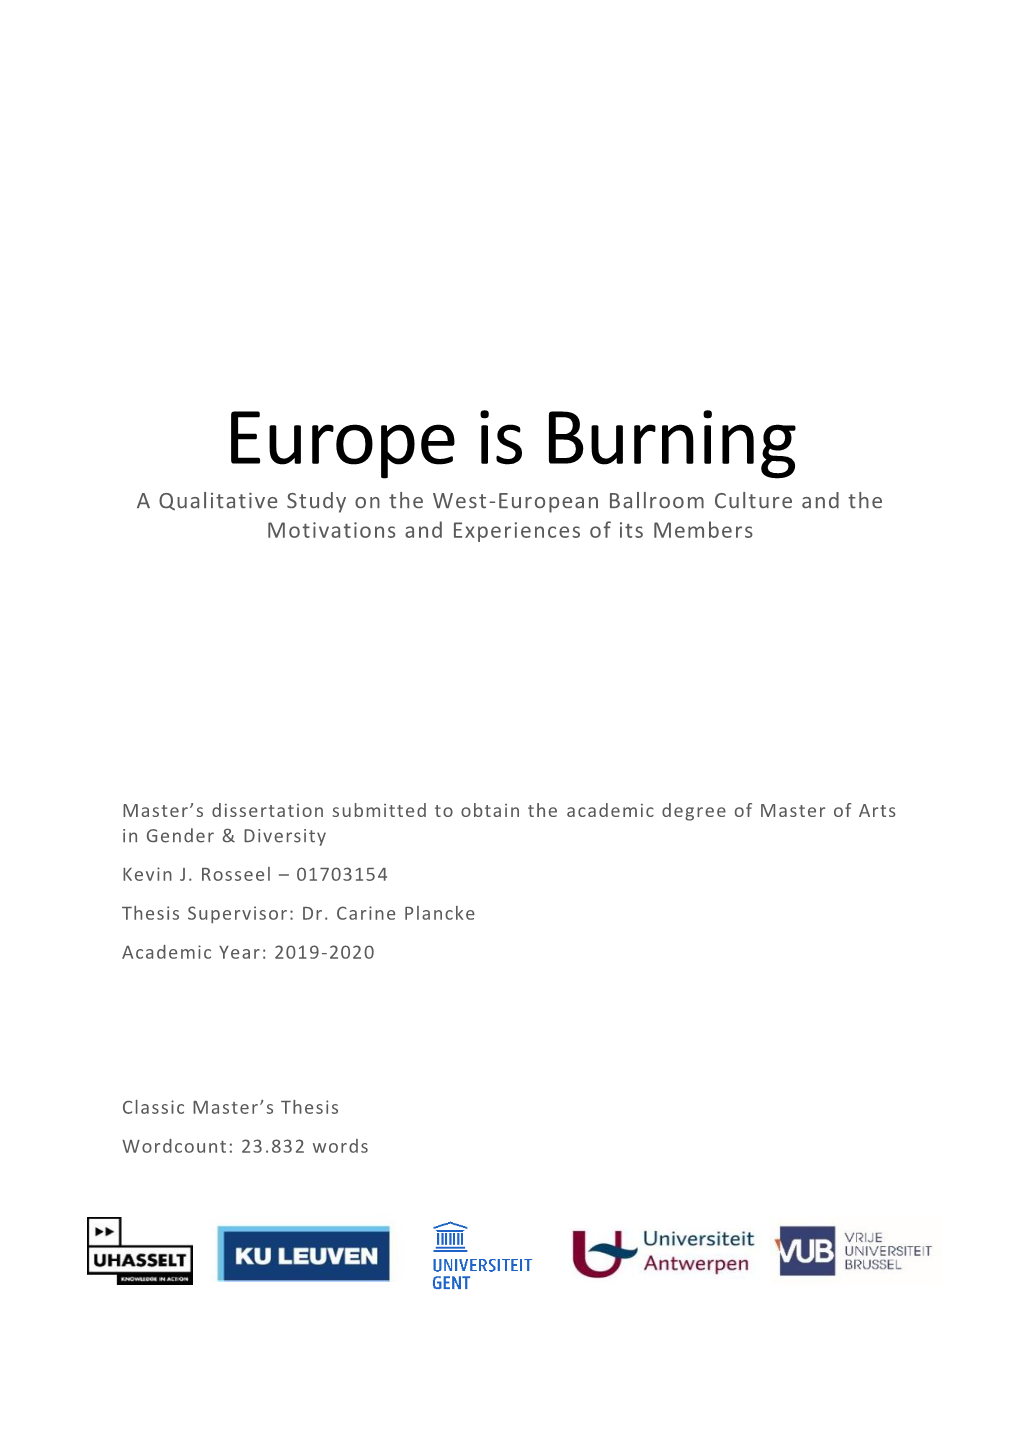 Europe Is Burning a Qualitative Study on the West-European Ballroom Culture and the Motivations and Experiences of Its Members